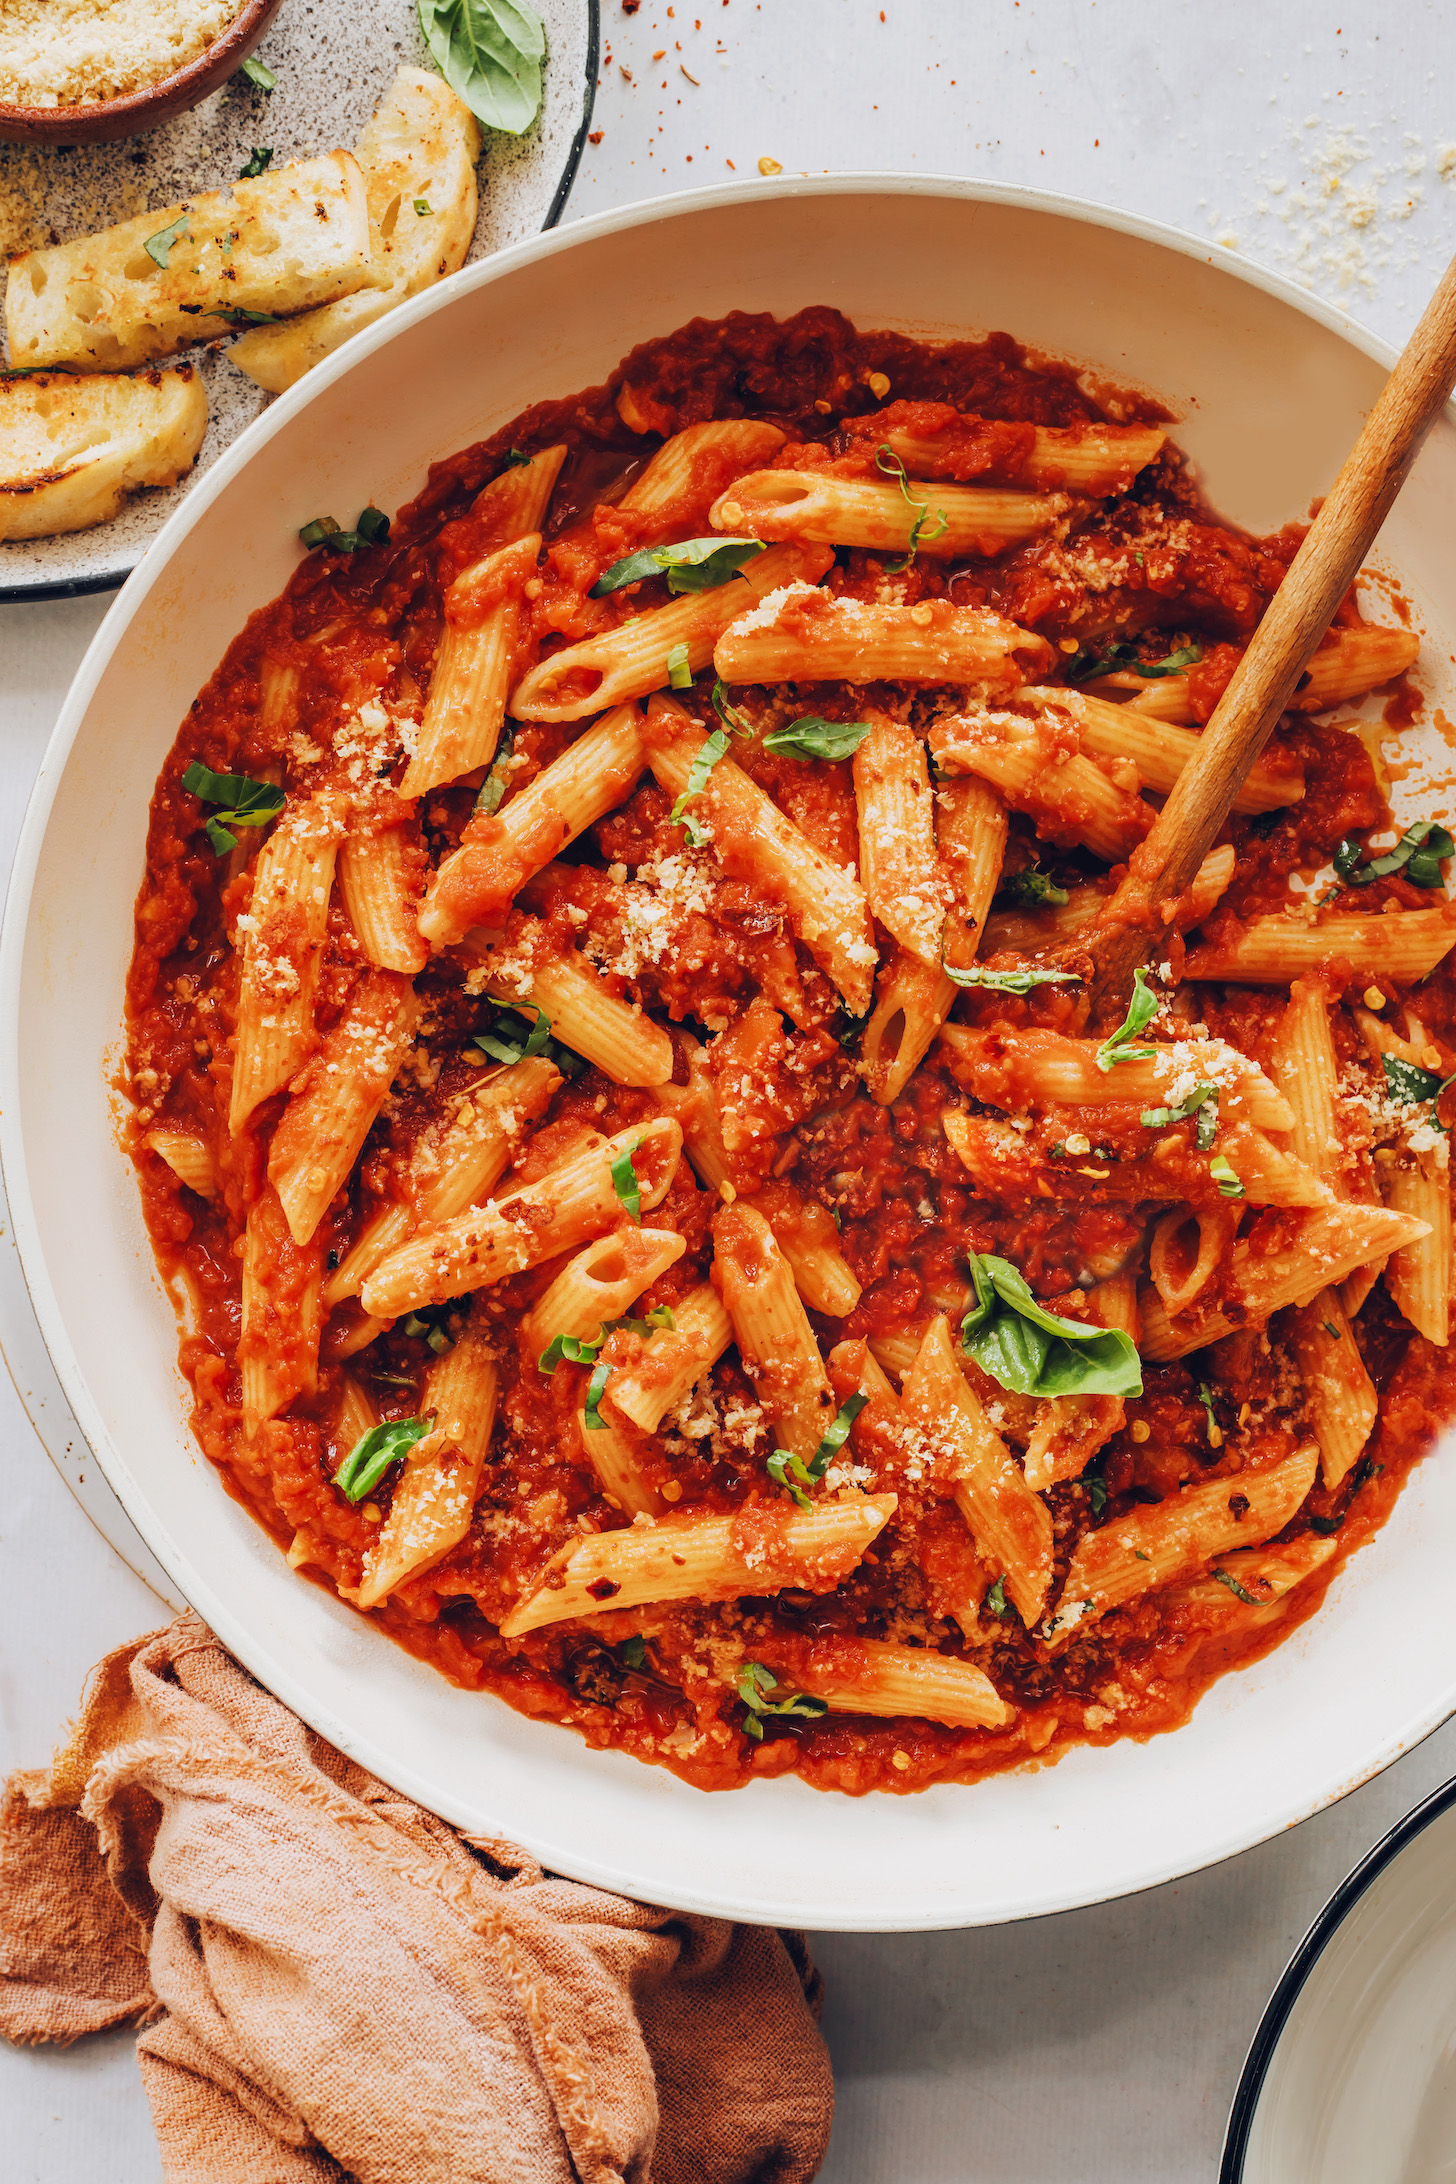 17 Delicious Vegan Pasta Recipes to Make This Weekend